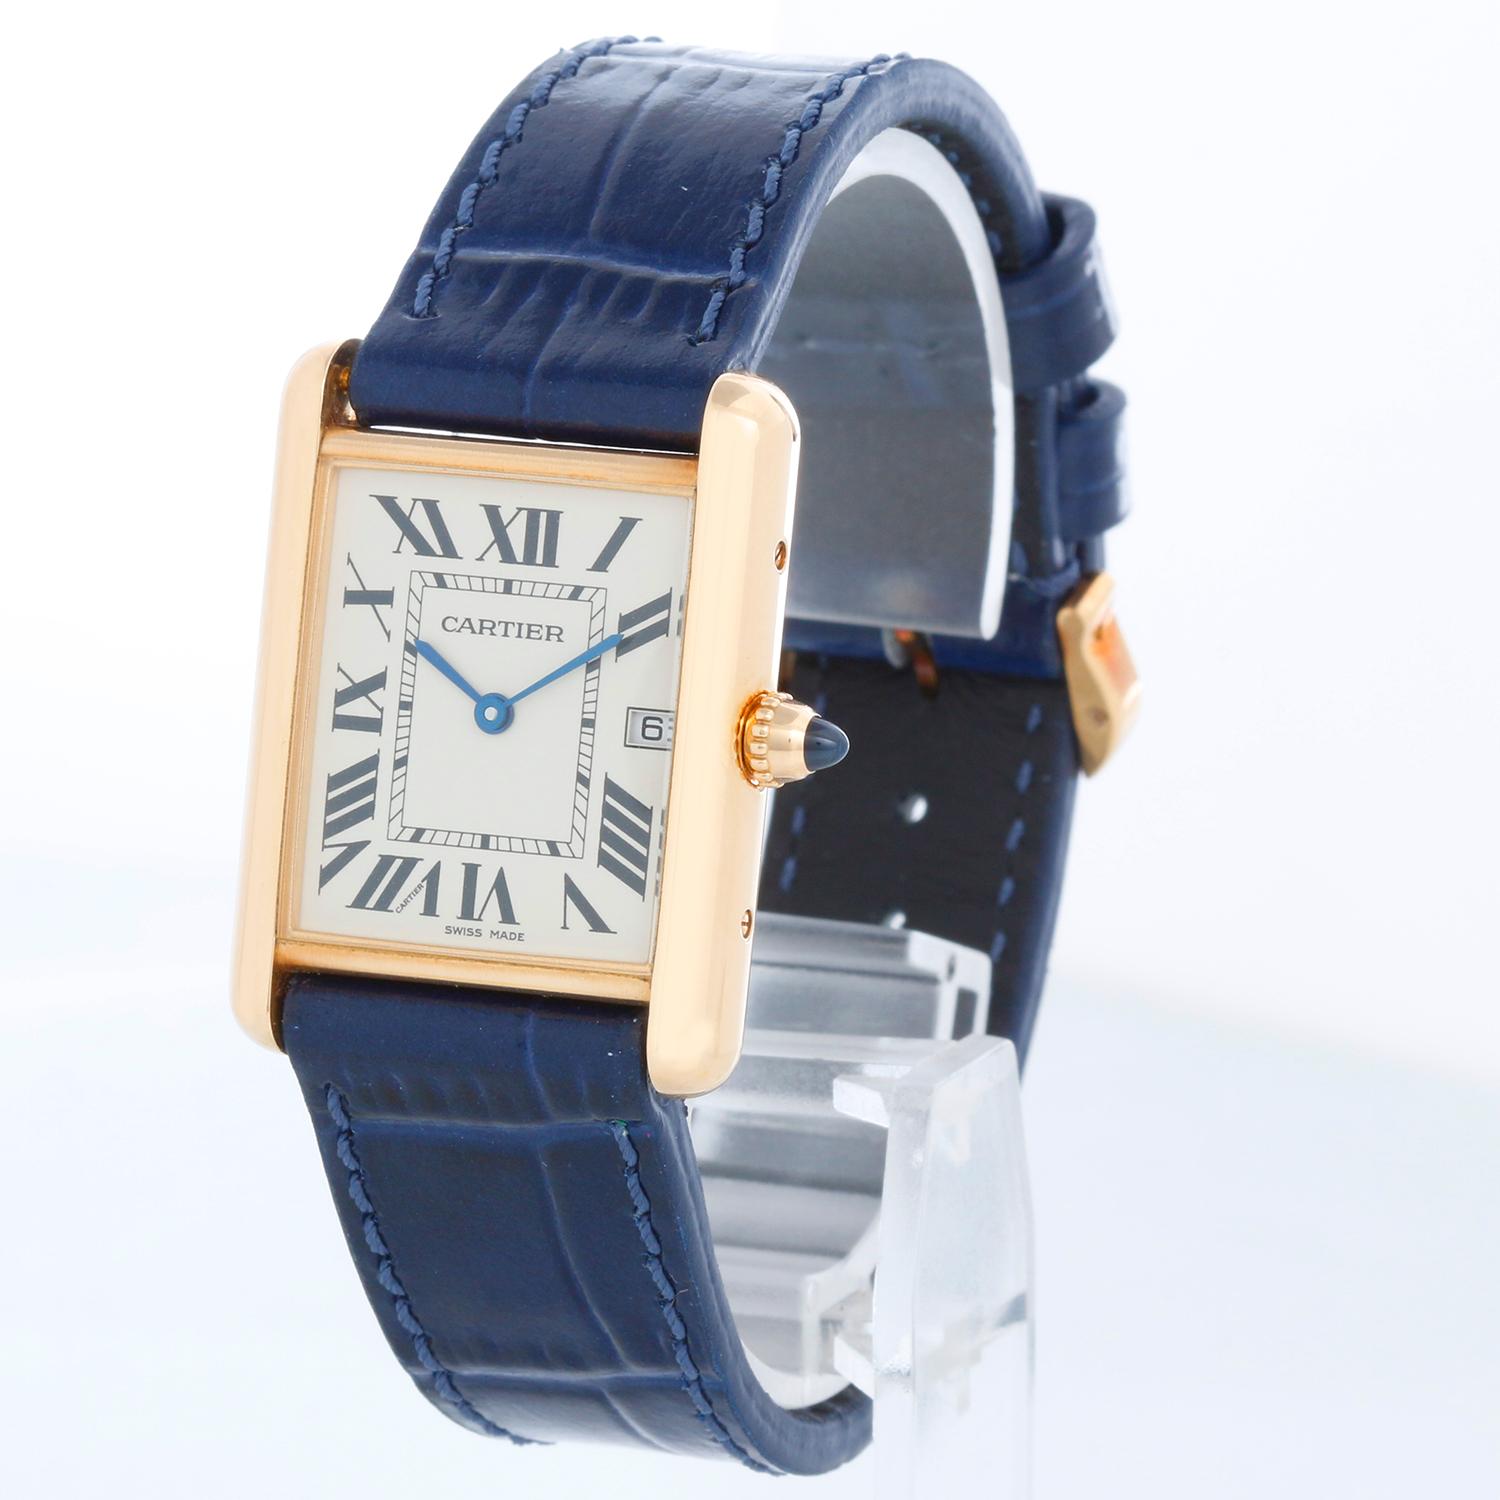 Cartier Tank Louis 18K Yellow Unisex Gold Watch W1529756 2441 - Quartz. 18K Yellow Gold ( 26 x 34 mm ). Flat Ivory dial with Roman numerals; date at 3 o'clock. Blue strap with Cartier tang gold buckle. Pre-owned with custom box.